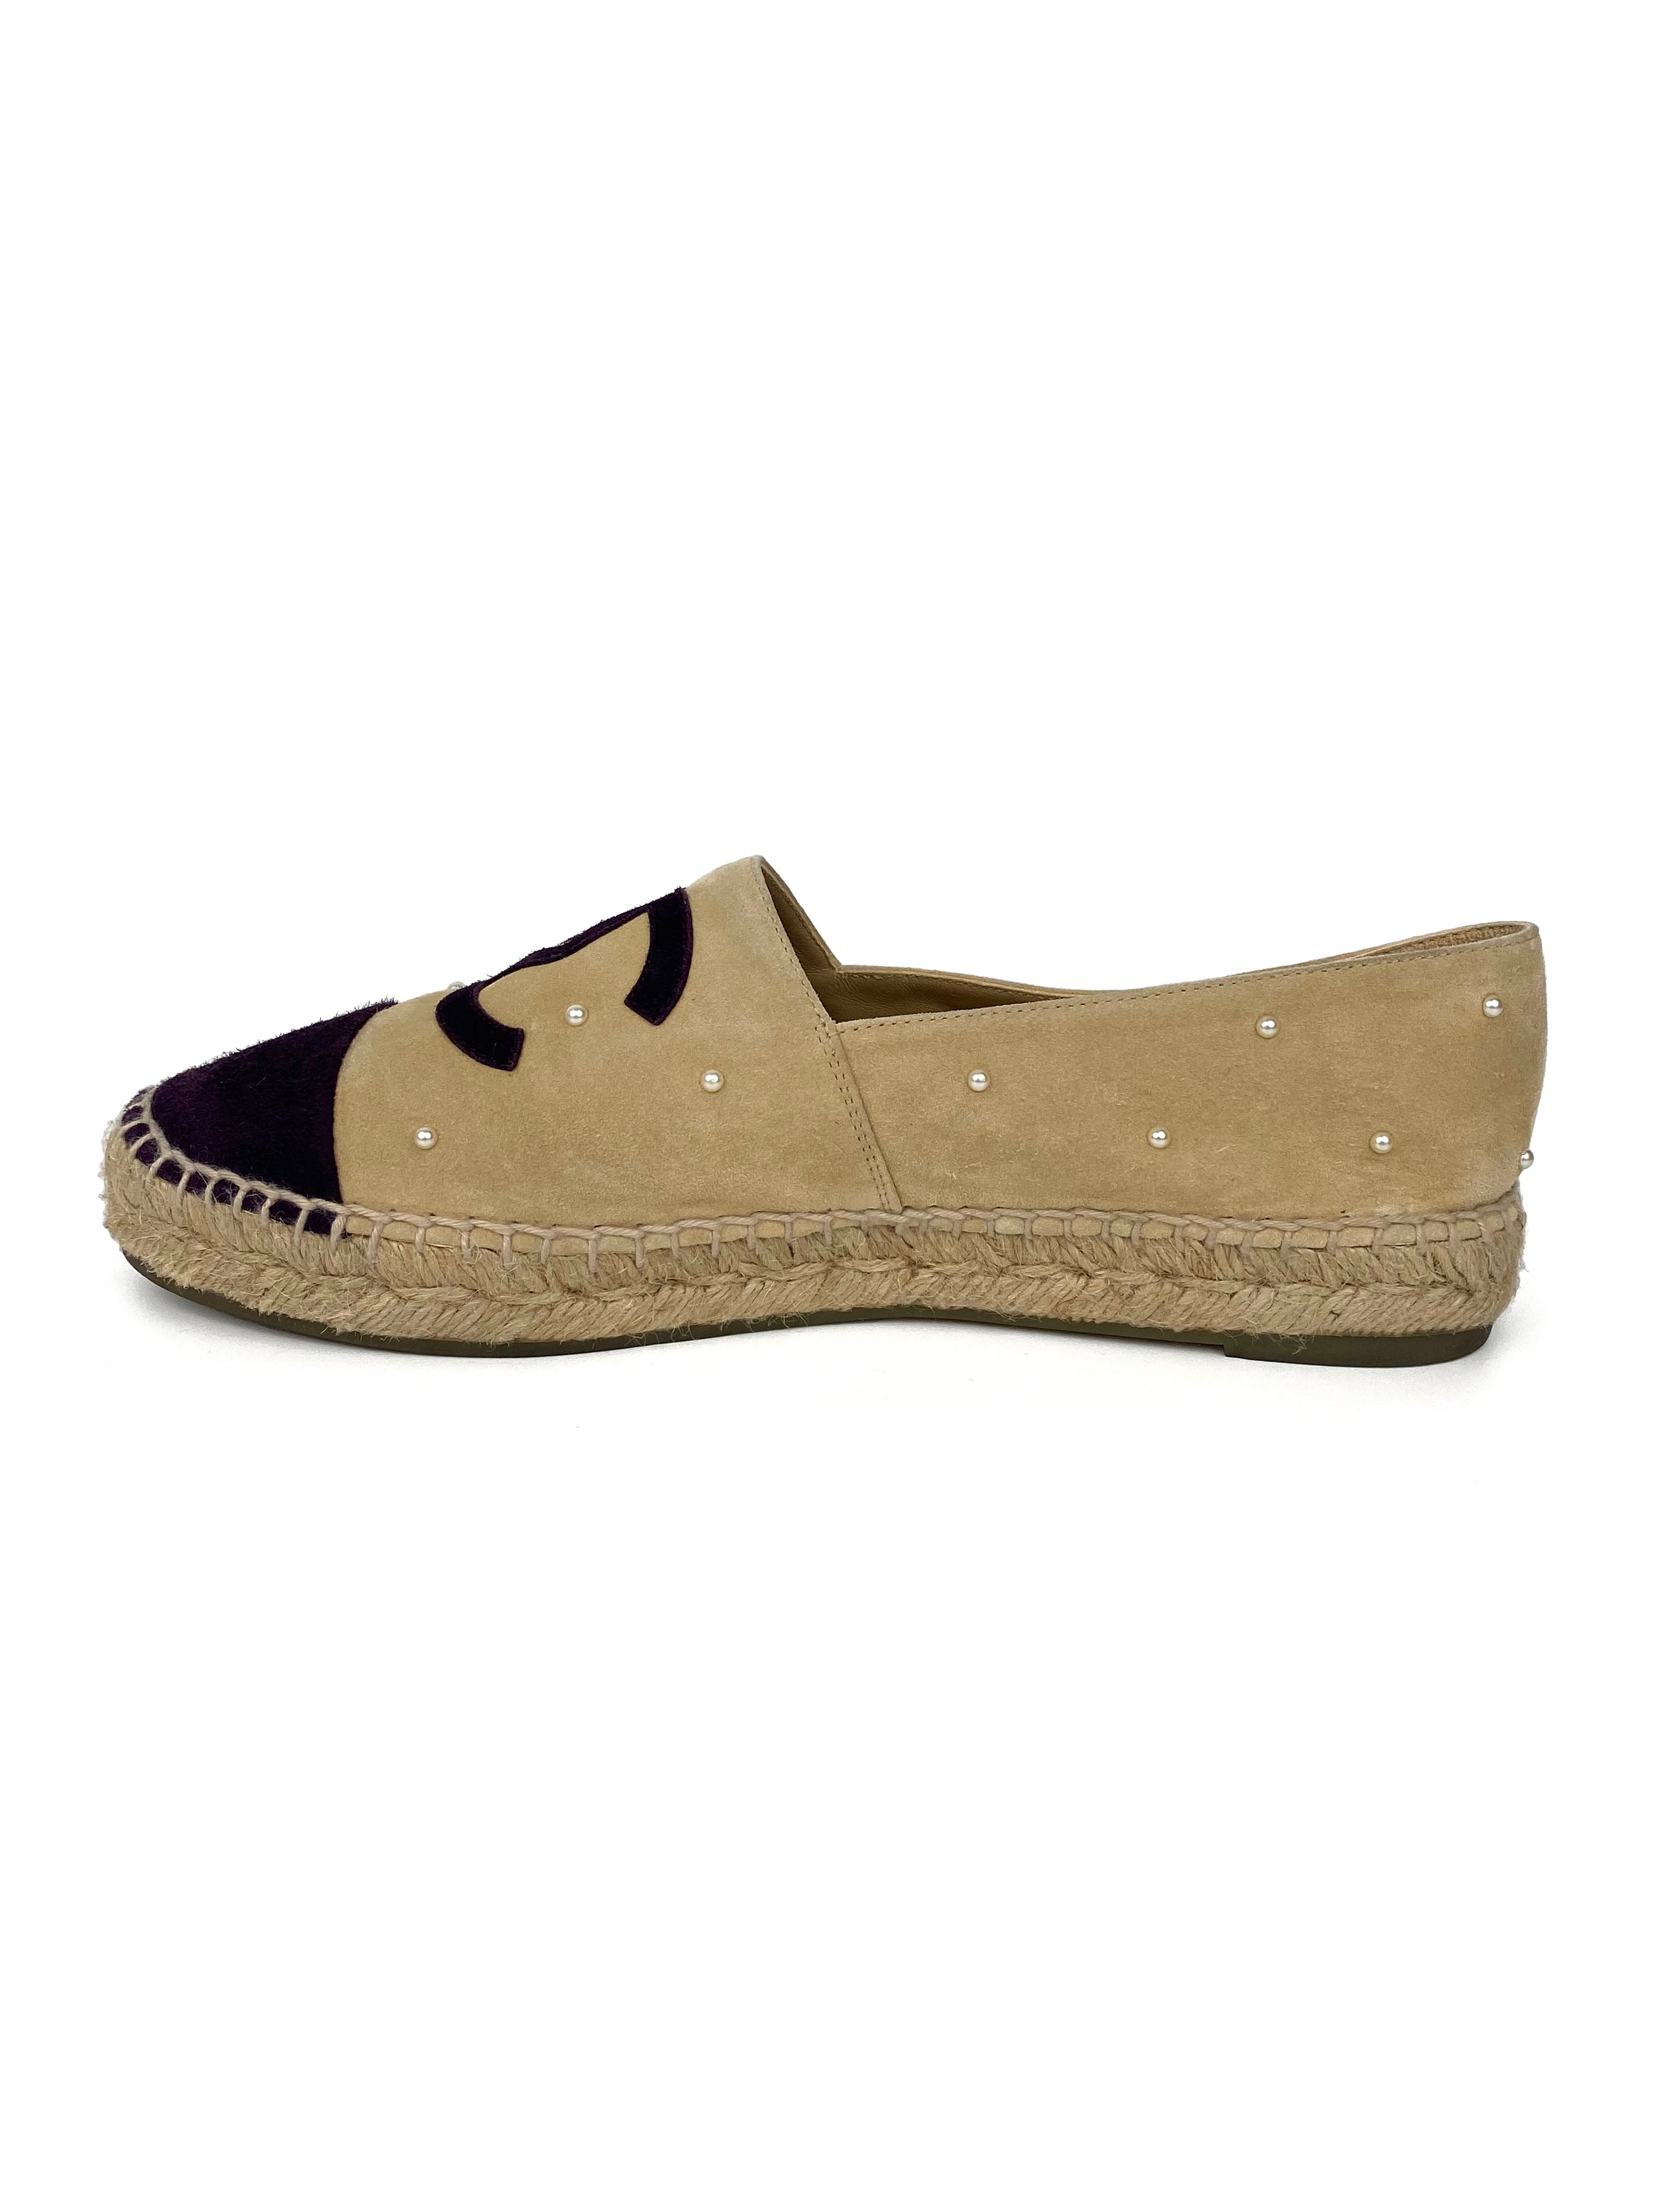 Chanel CC Pearl Studded Suede Espadrilles 39